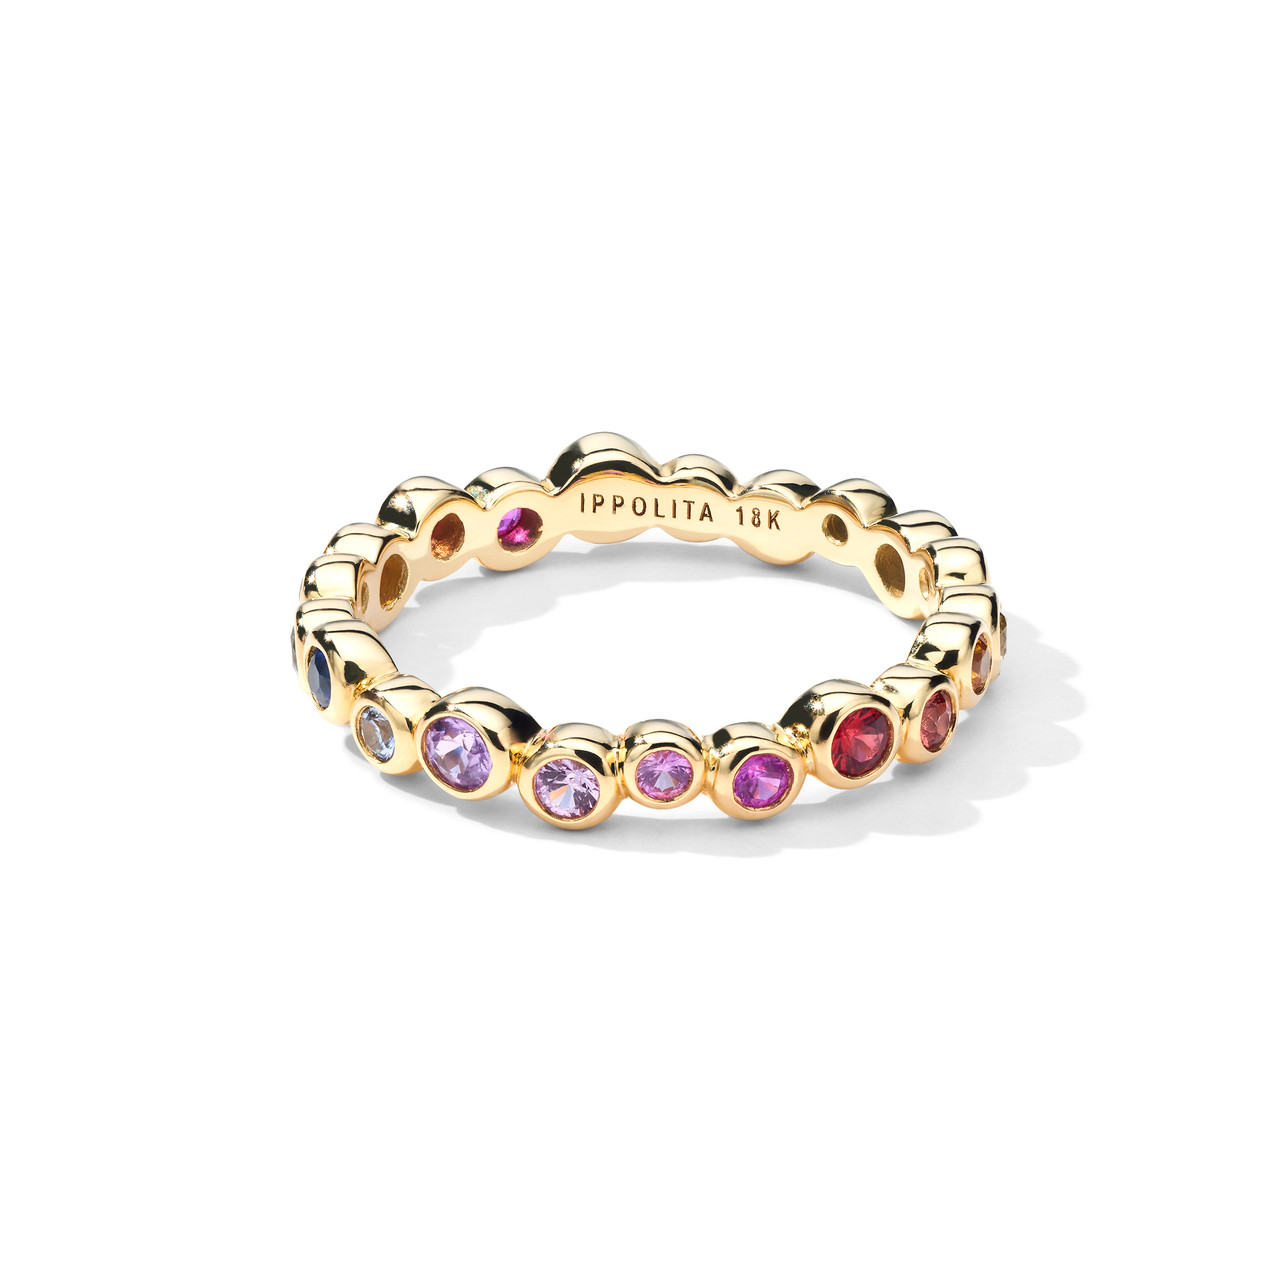 Starlet Band Ring in 18K Gold